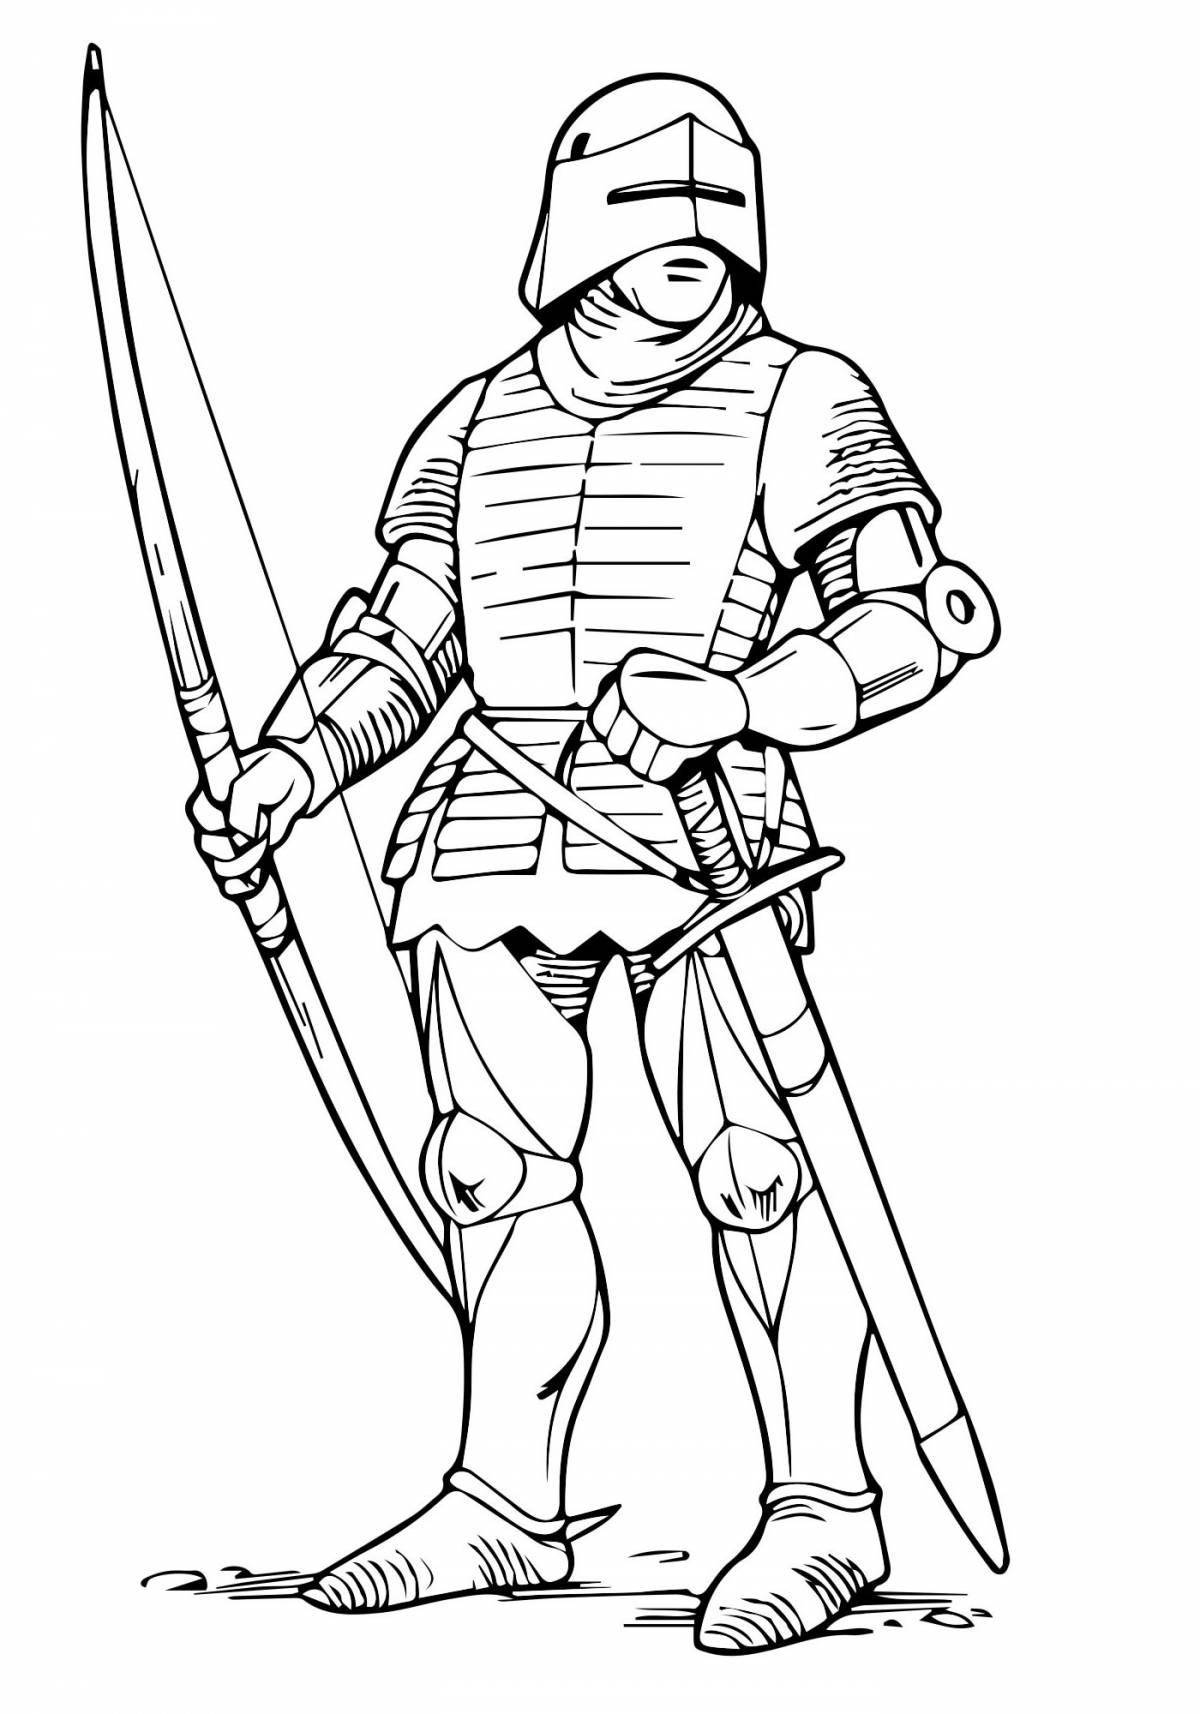 Knight shiny coloring book